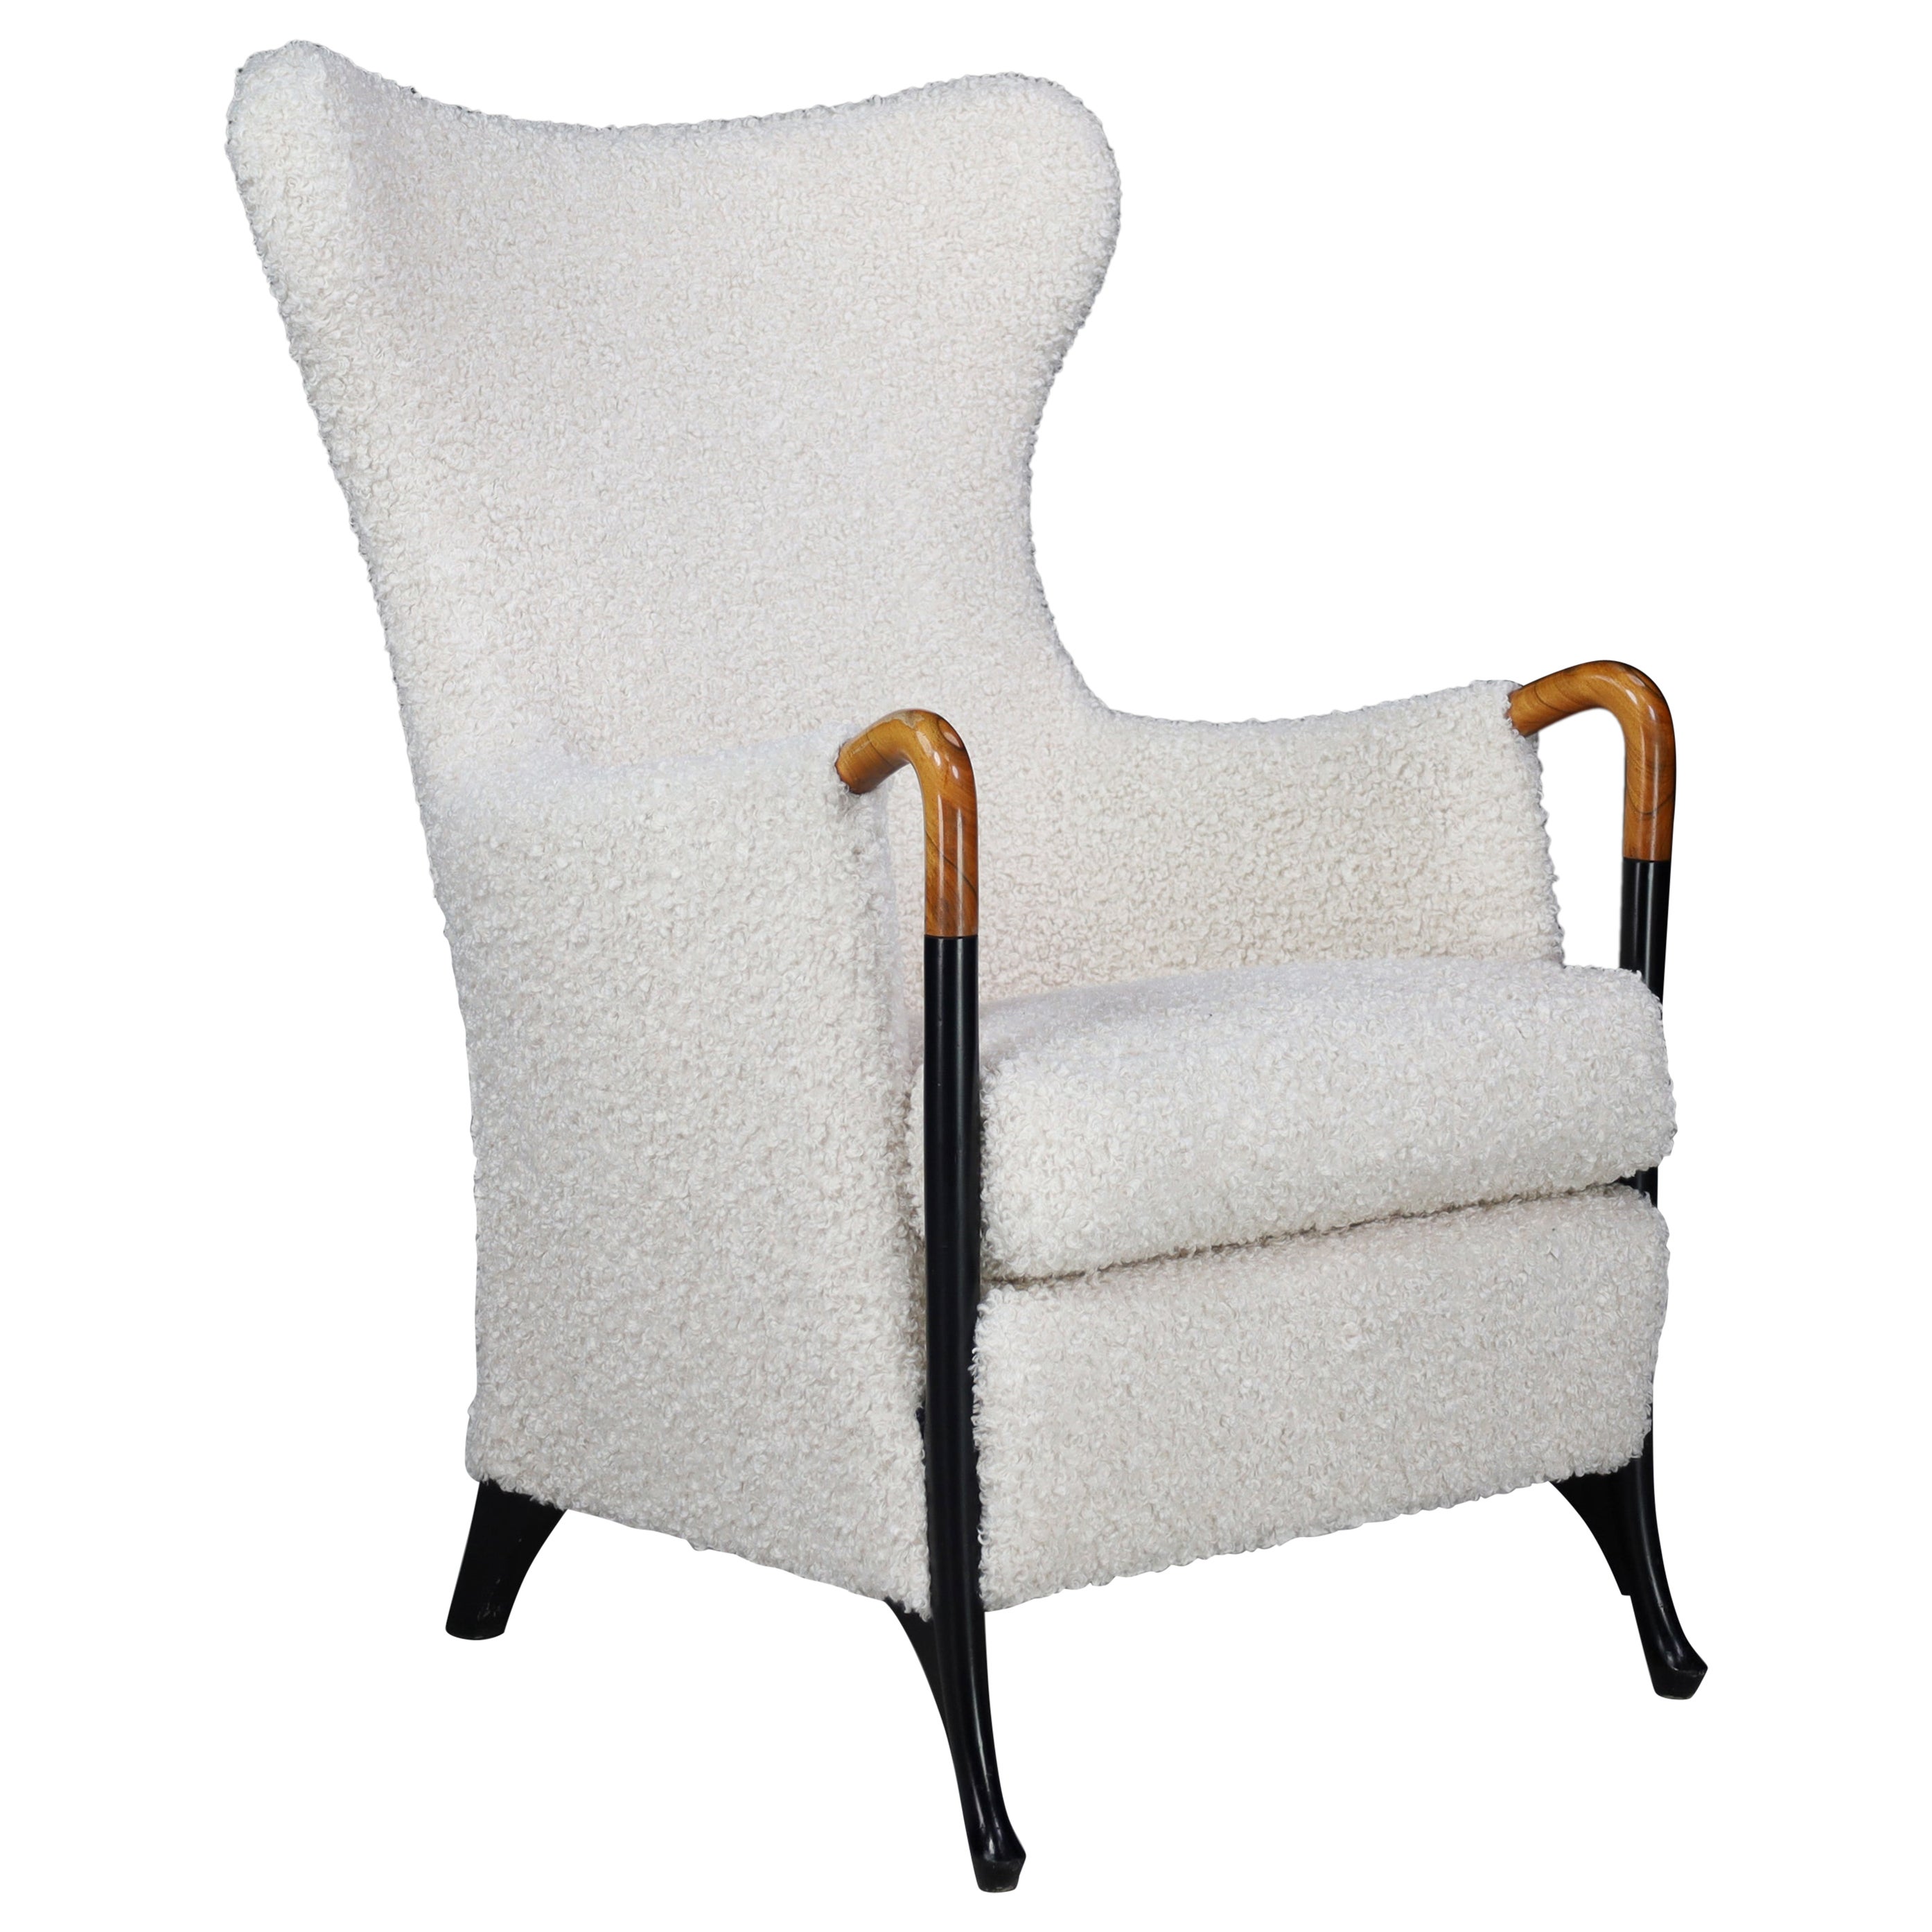 Giorgetti S.p.A. Wingback Chairs